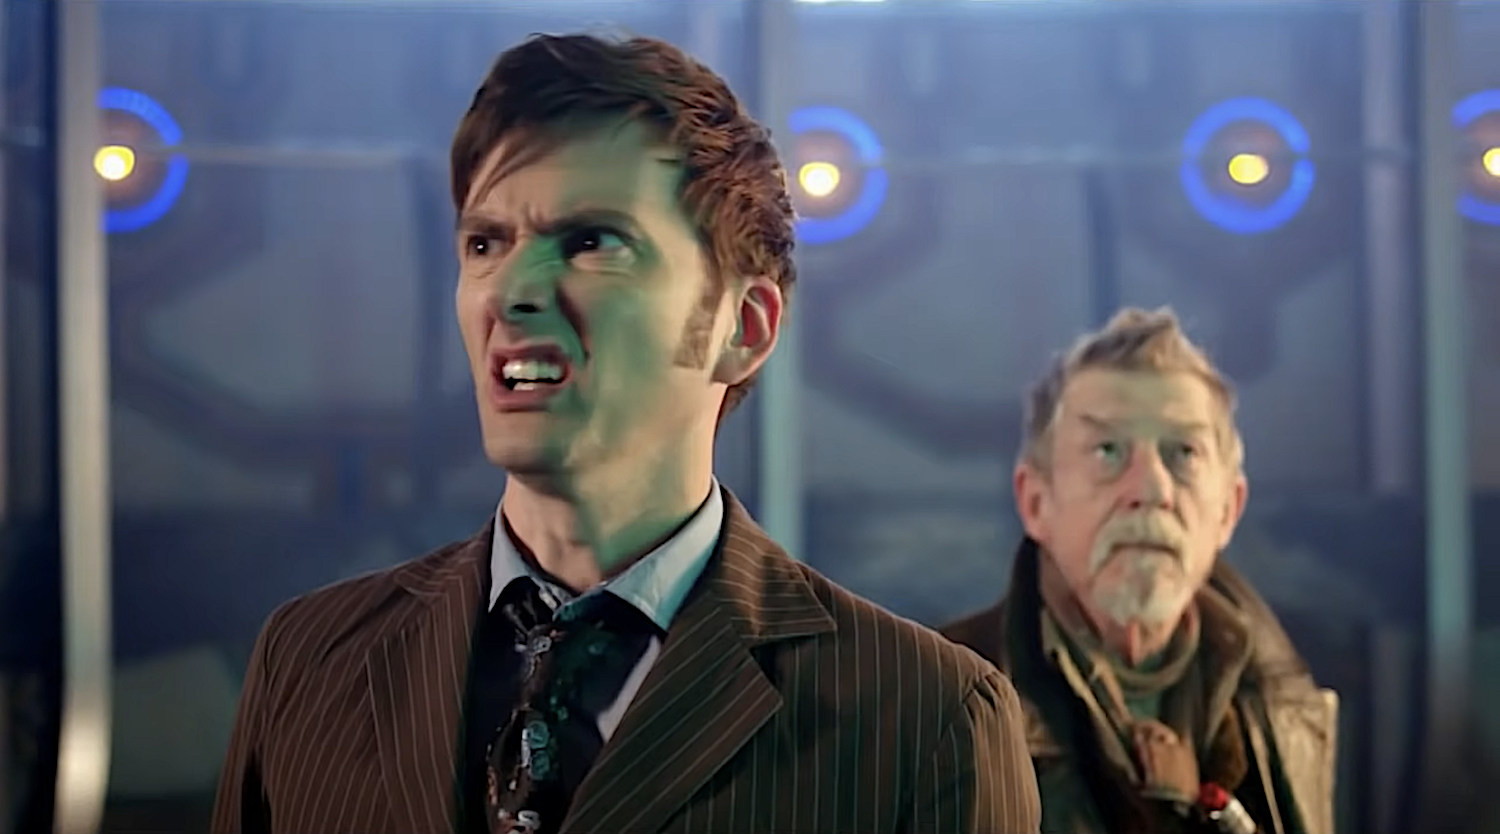 Screencap of "You've redecorated! I don't like it." from Doctor Who episode The Day Of The Doctor